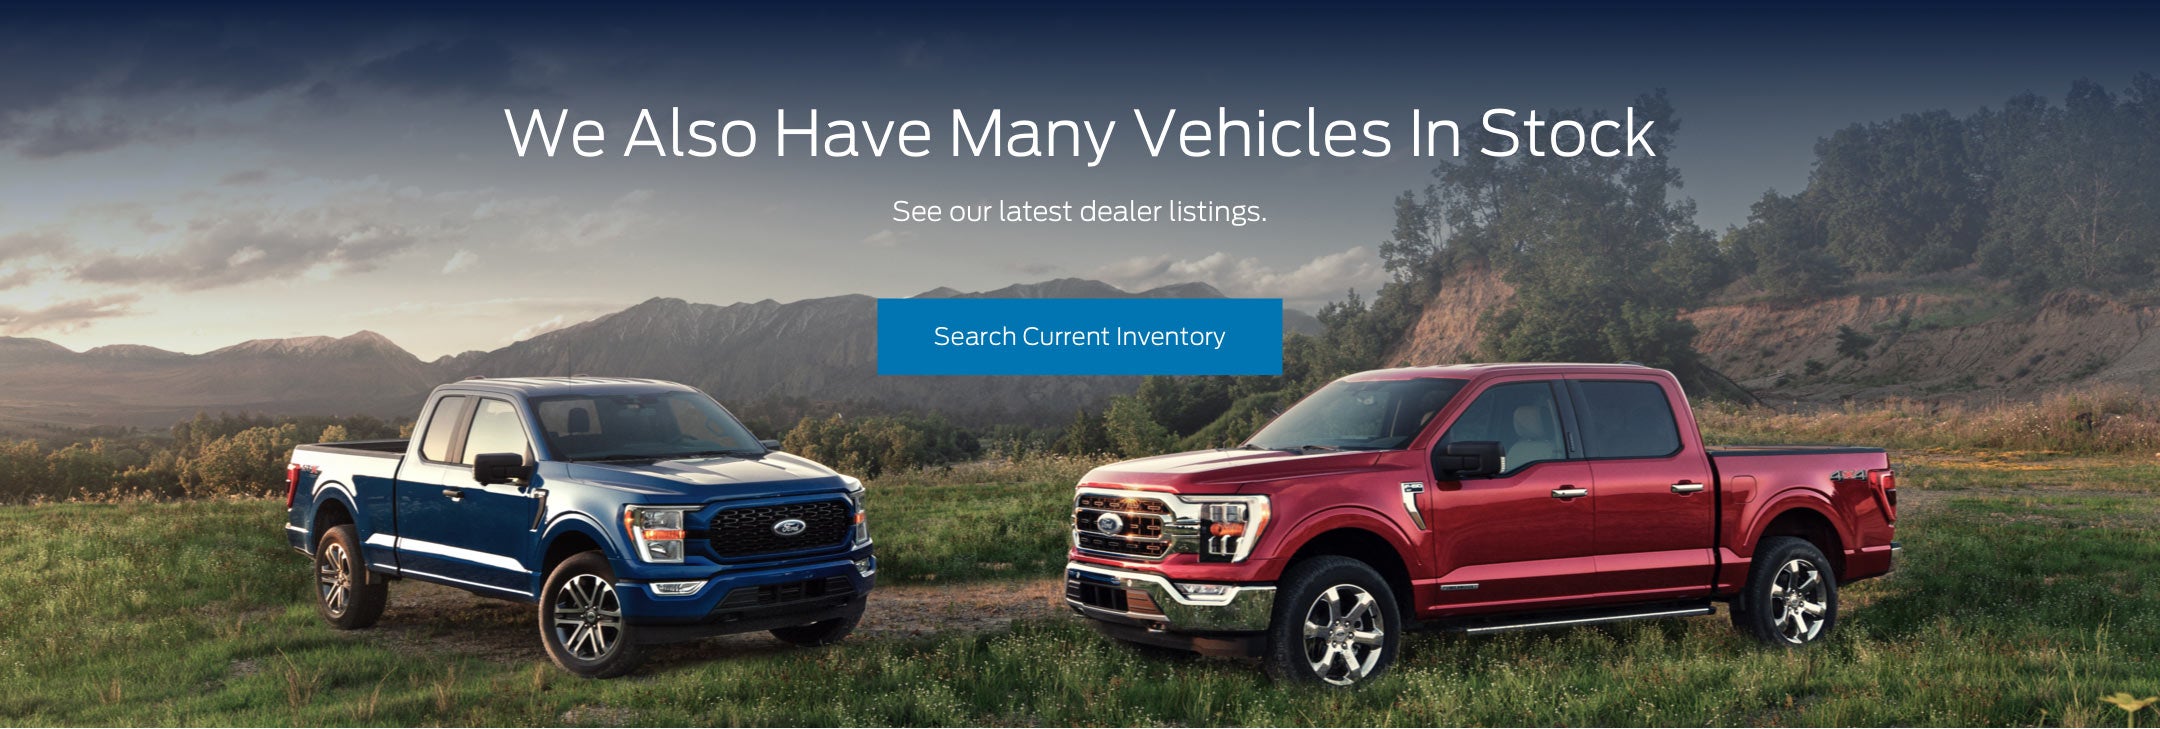 Ford vehicles in stock | Bill Grant Ford in Bolivar MO